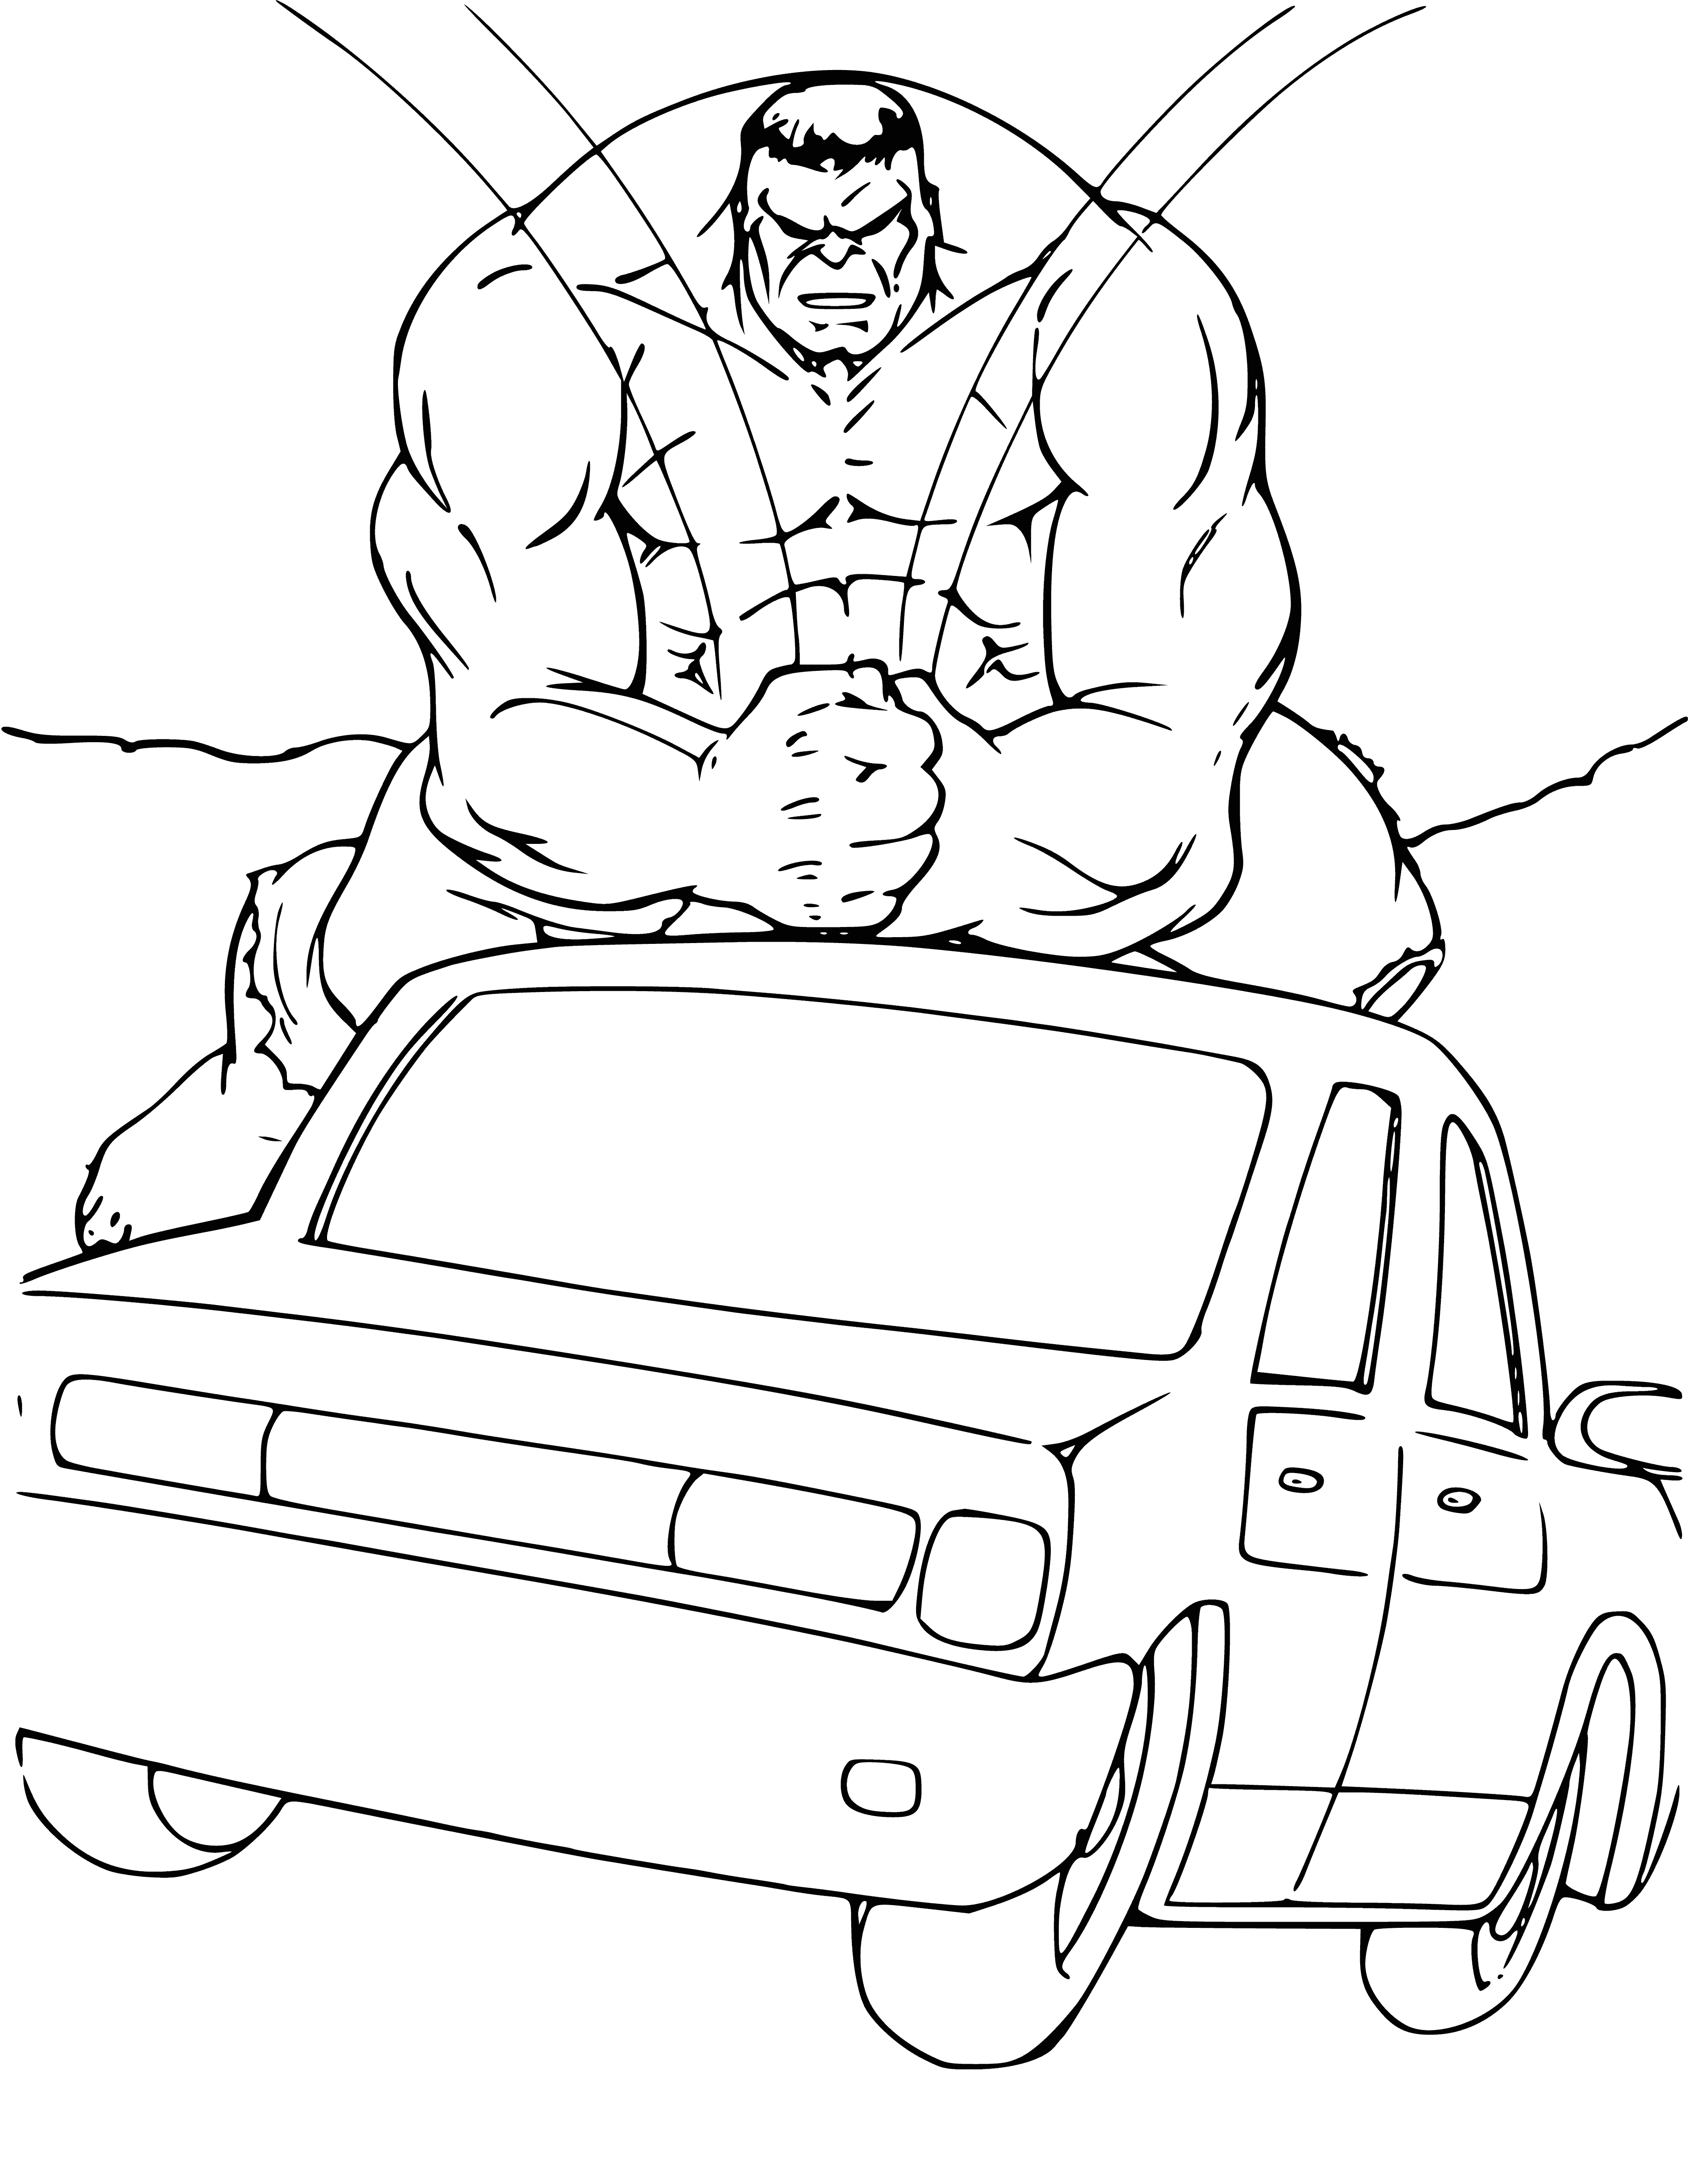 coloring page: Hulk is a strong, green monster with red eyes and purple pants. He is incredibly powerful and able to heal from any wound. He's viewed as both a destroyer and ally.